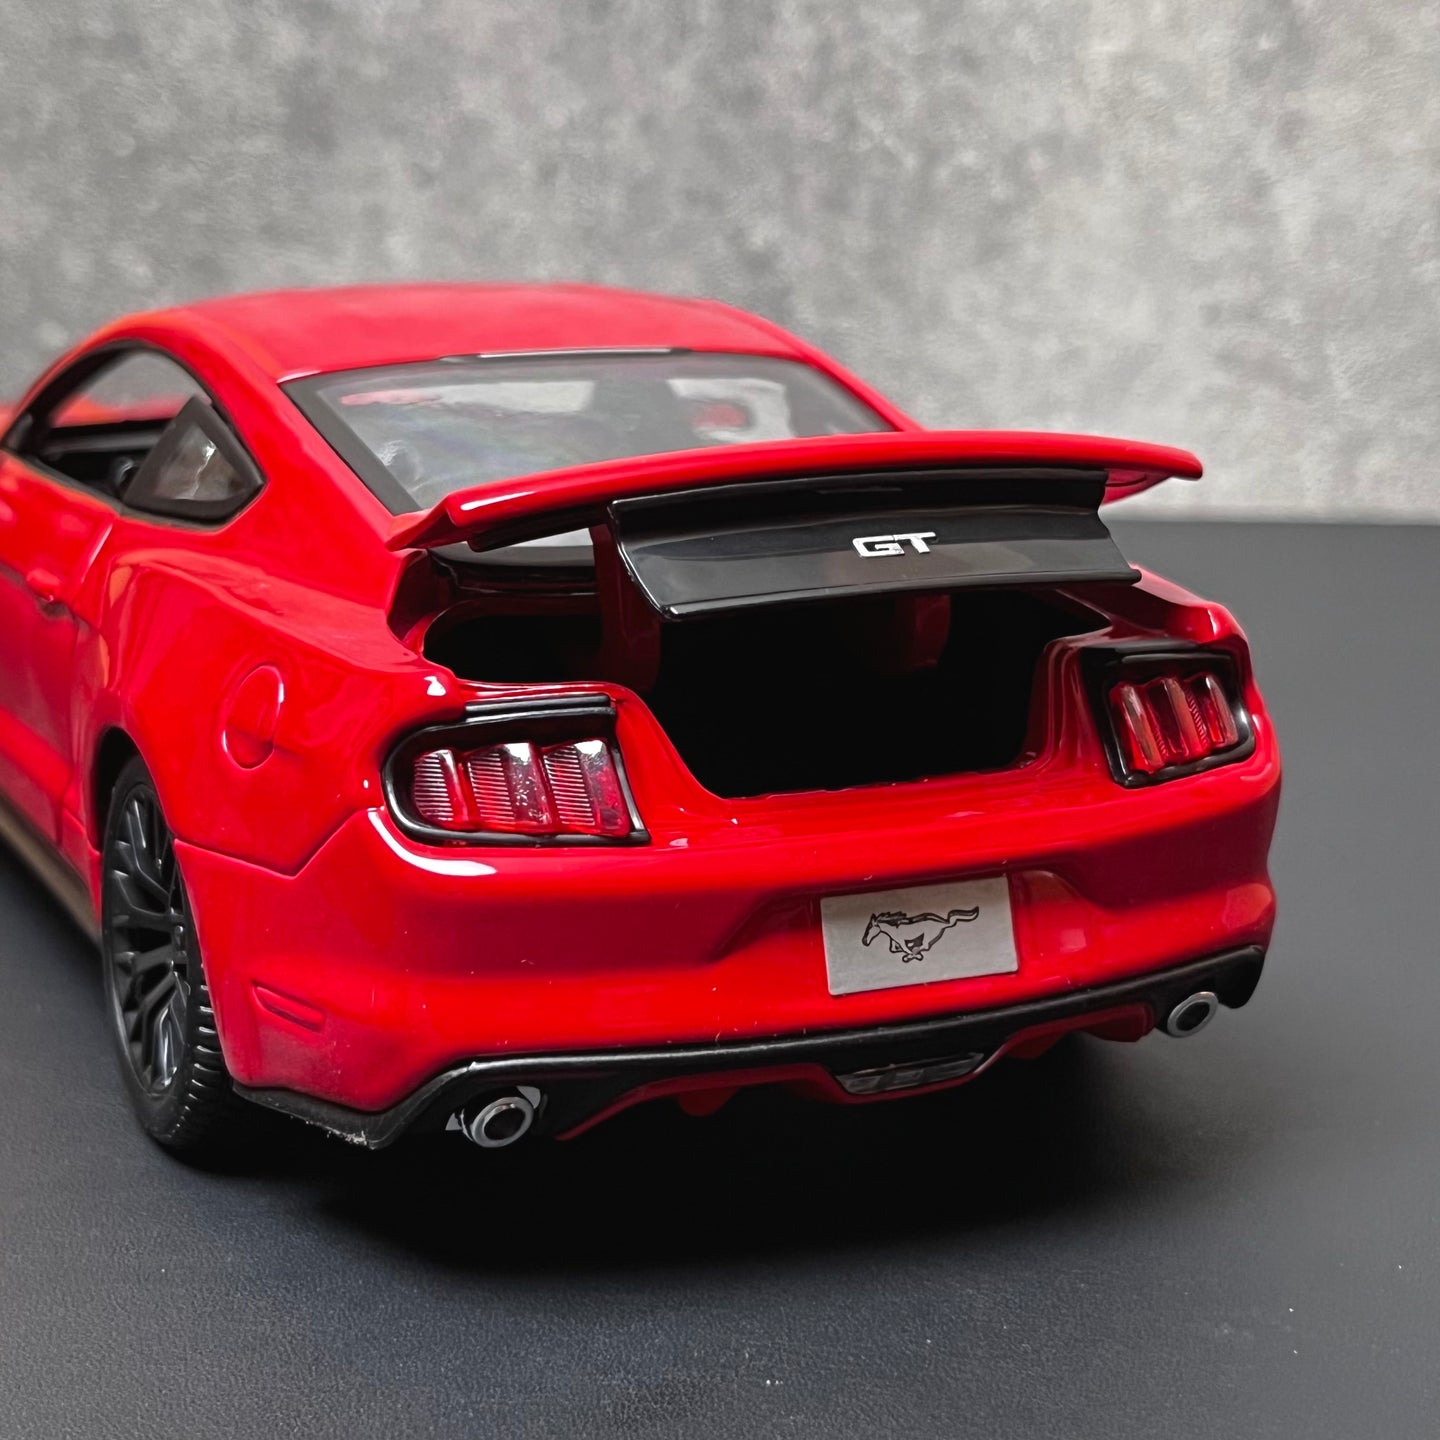 2015 Ford Mustang GT Red Diecast Car Model 1:18 By Maisto